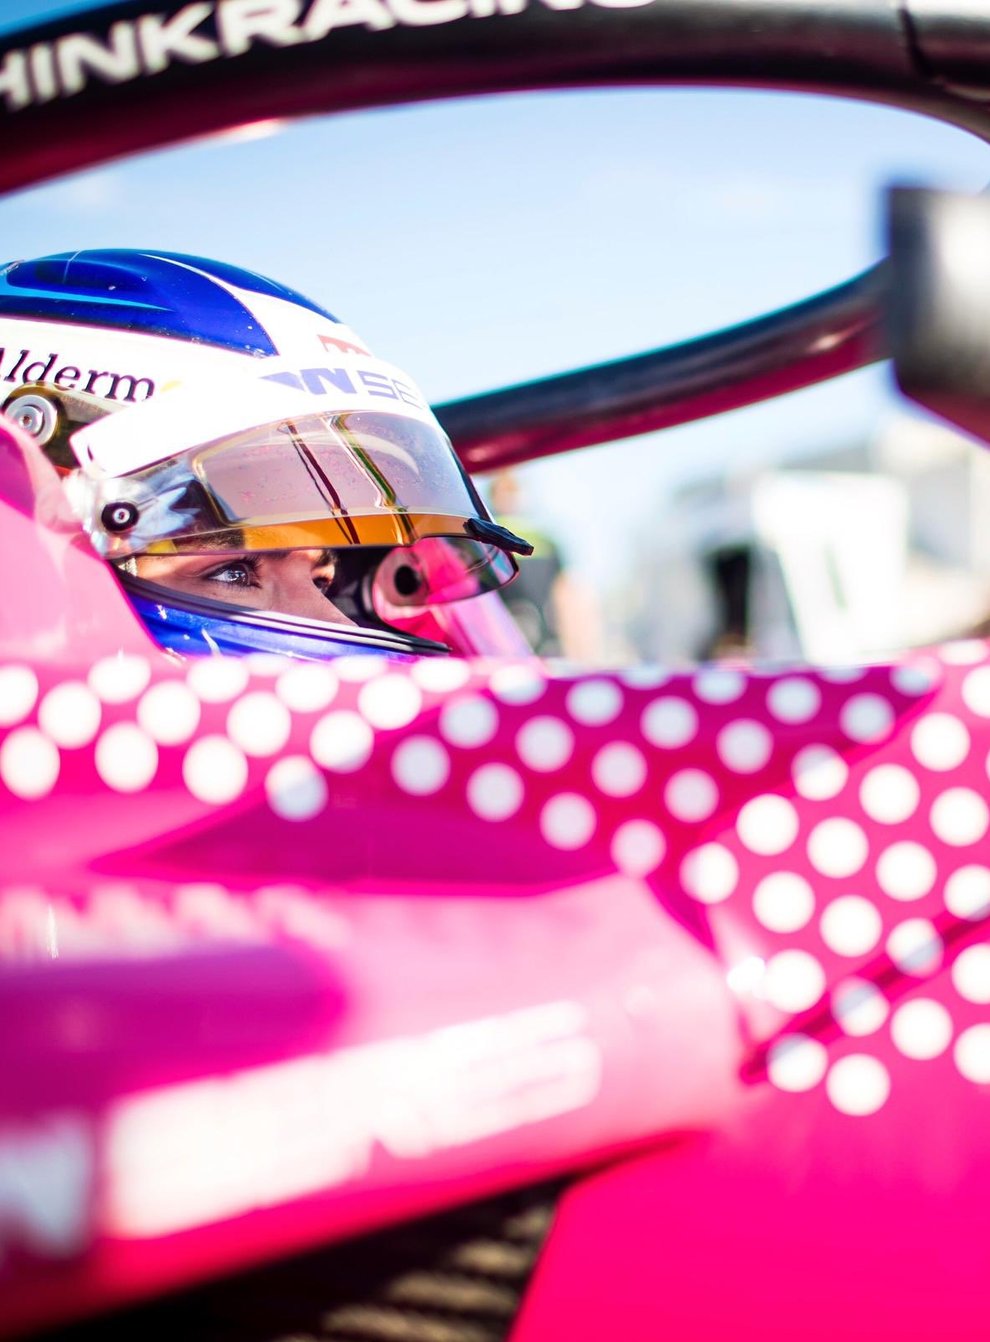 Jamie Chadwick is ready to join Absolute Racing for the 2019/2020 F3 Asian Championship (Twitter: @JamieChadwick55)